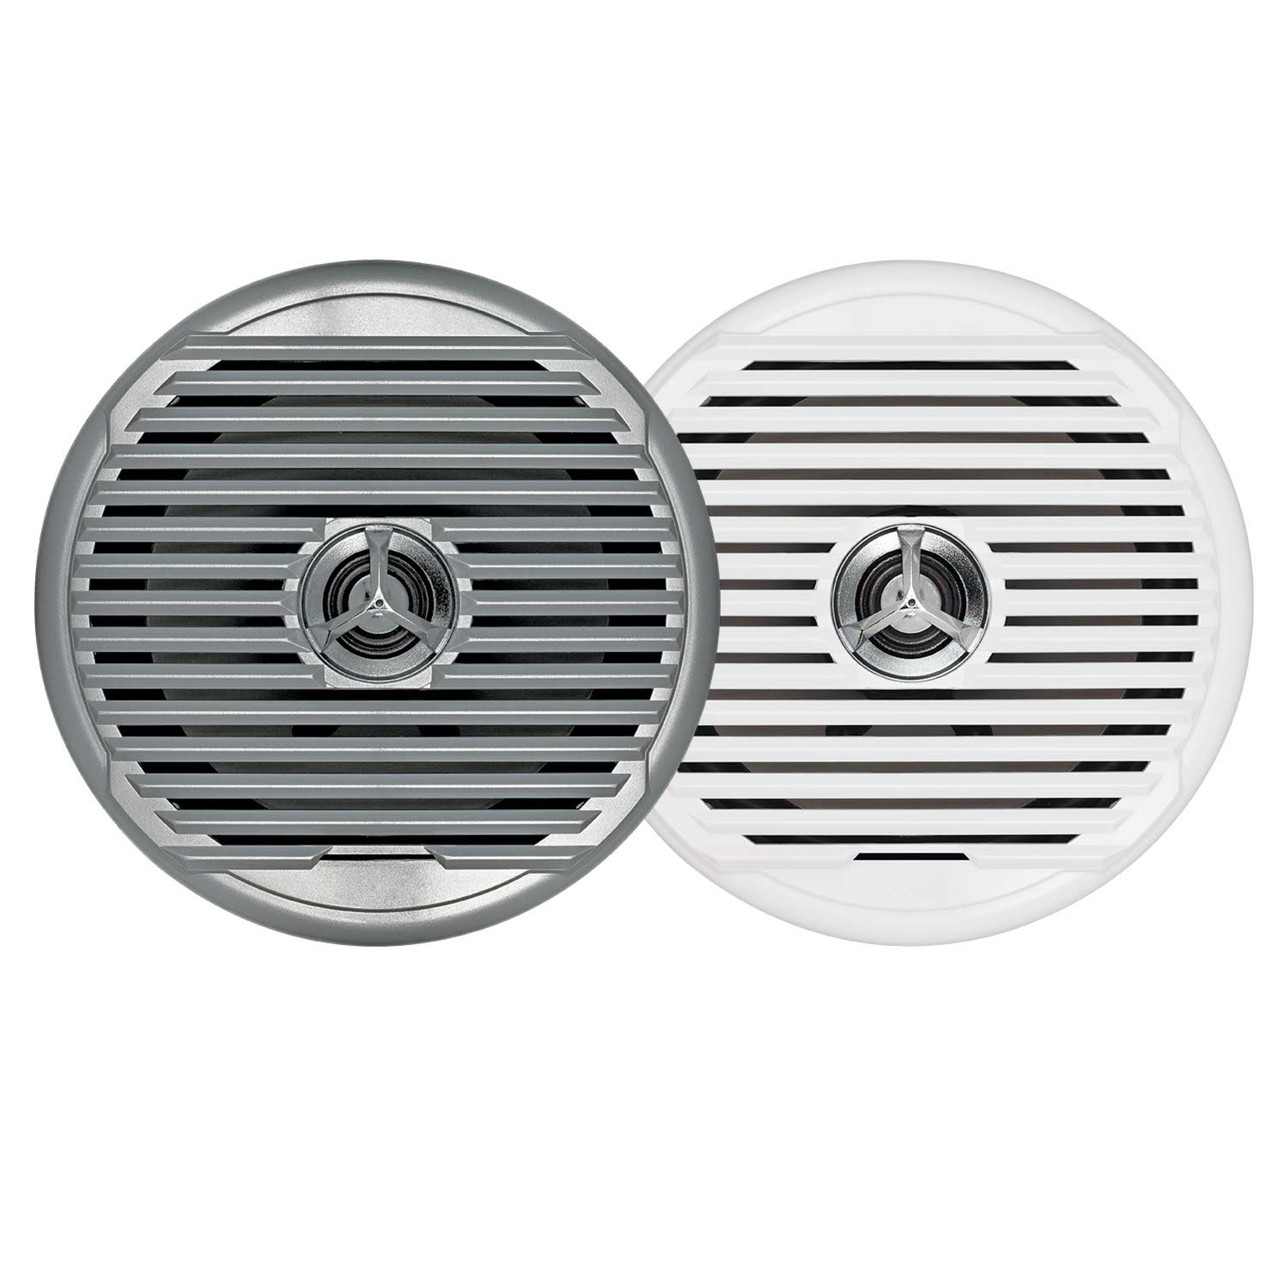 Jensen New Marine High Performance Speakers White and Silver, 650-MSX65R